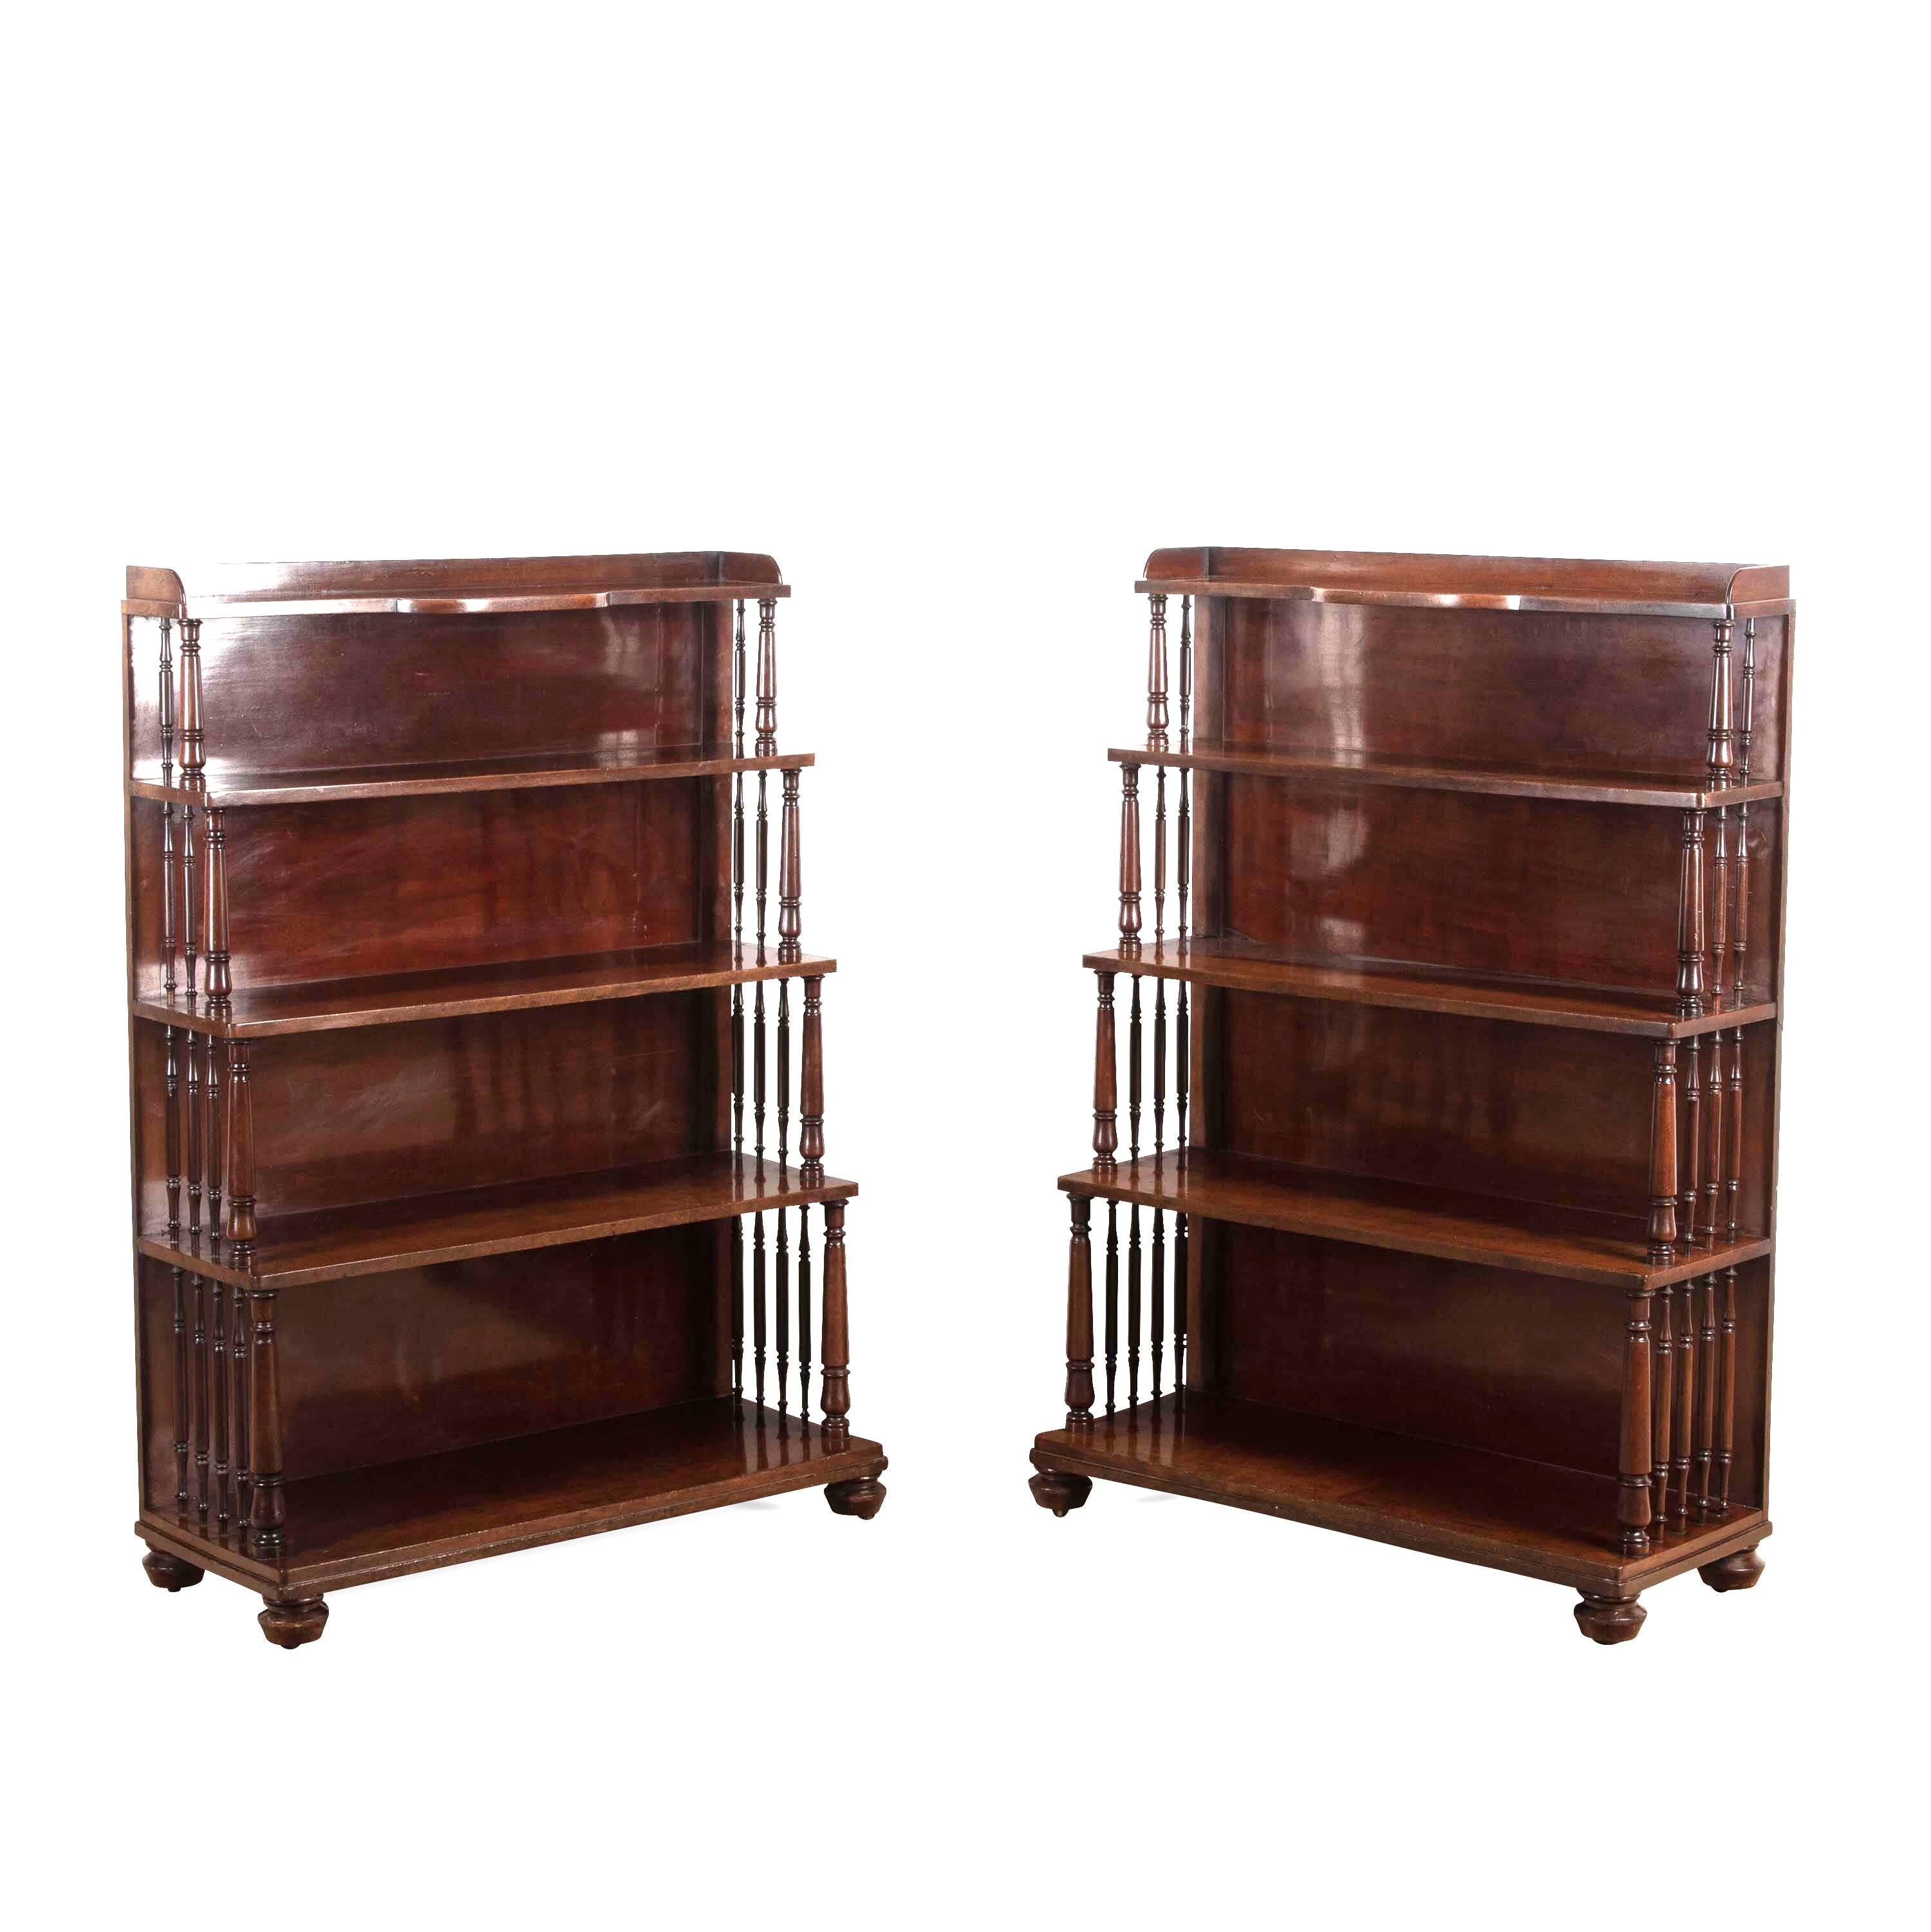 Pair of 19th Century Regency Mahogany Waterfall Bookcases For Sale 1